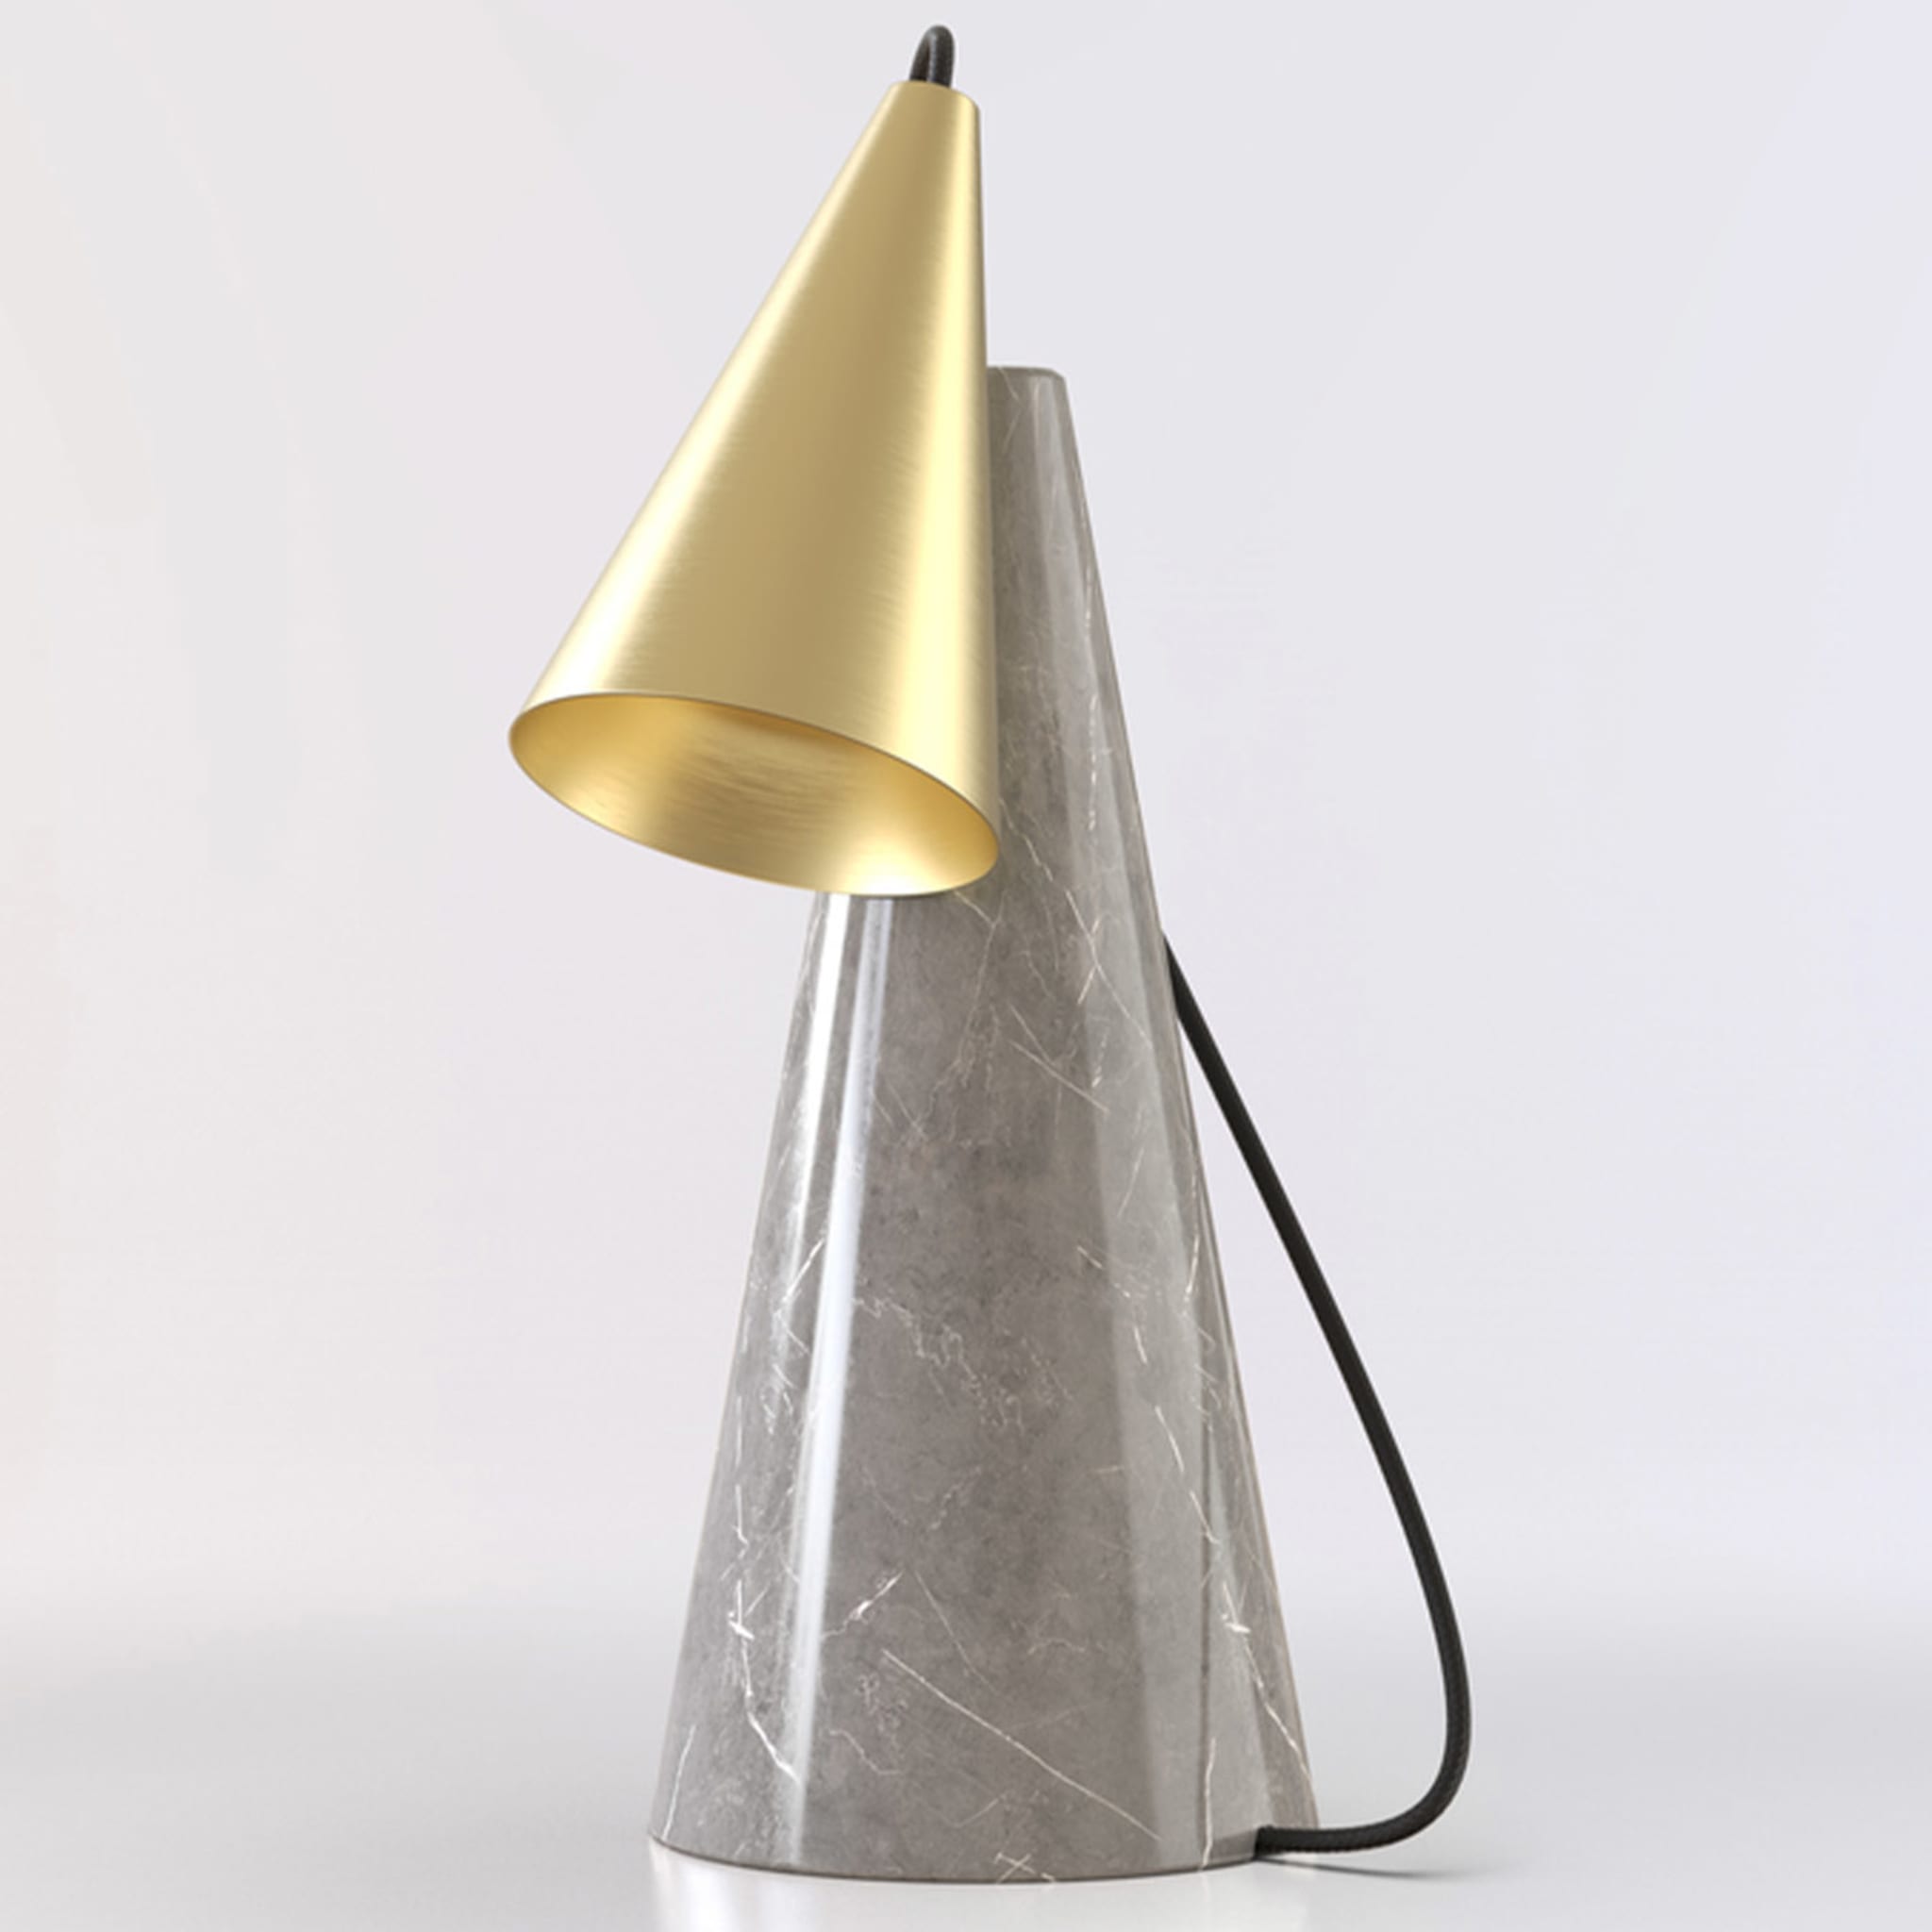 ED038 Grey Stone and Brass Table Lamp - Alternative view 1